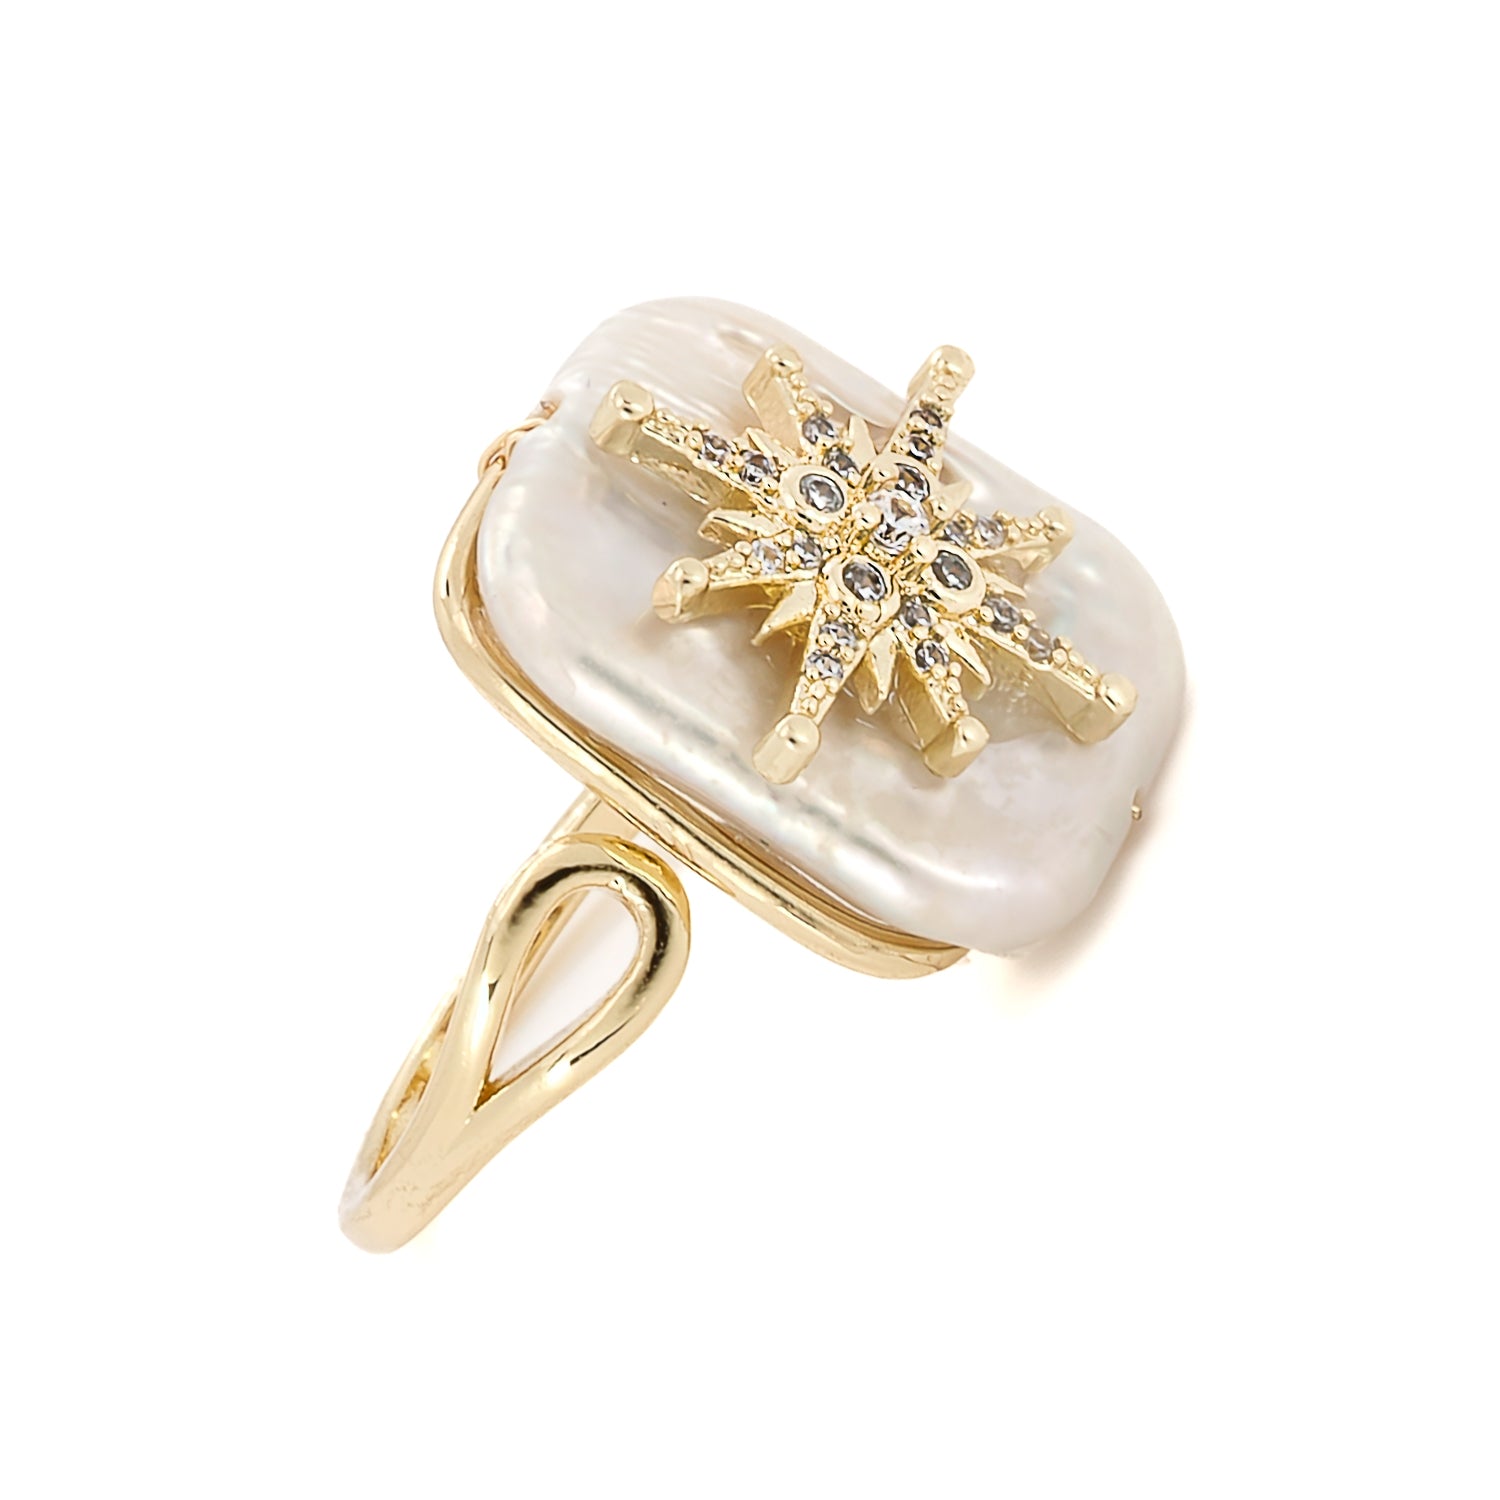 Cleopatra Guidance Star Pearl Ring - A symbol of elegance and wisdom.